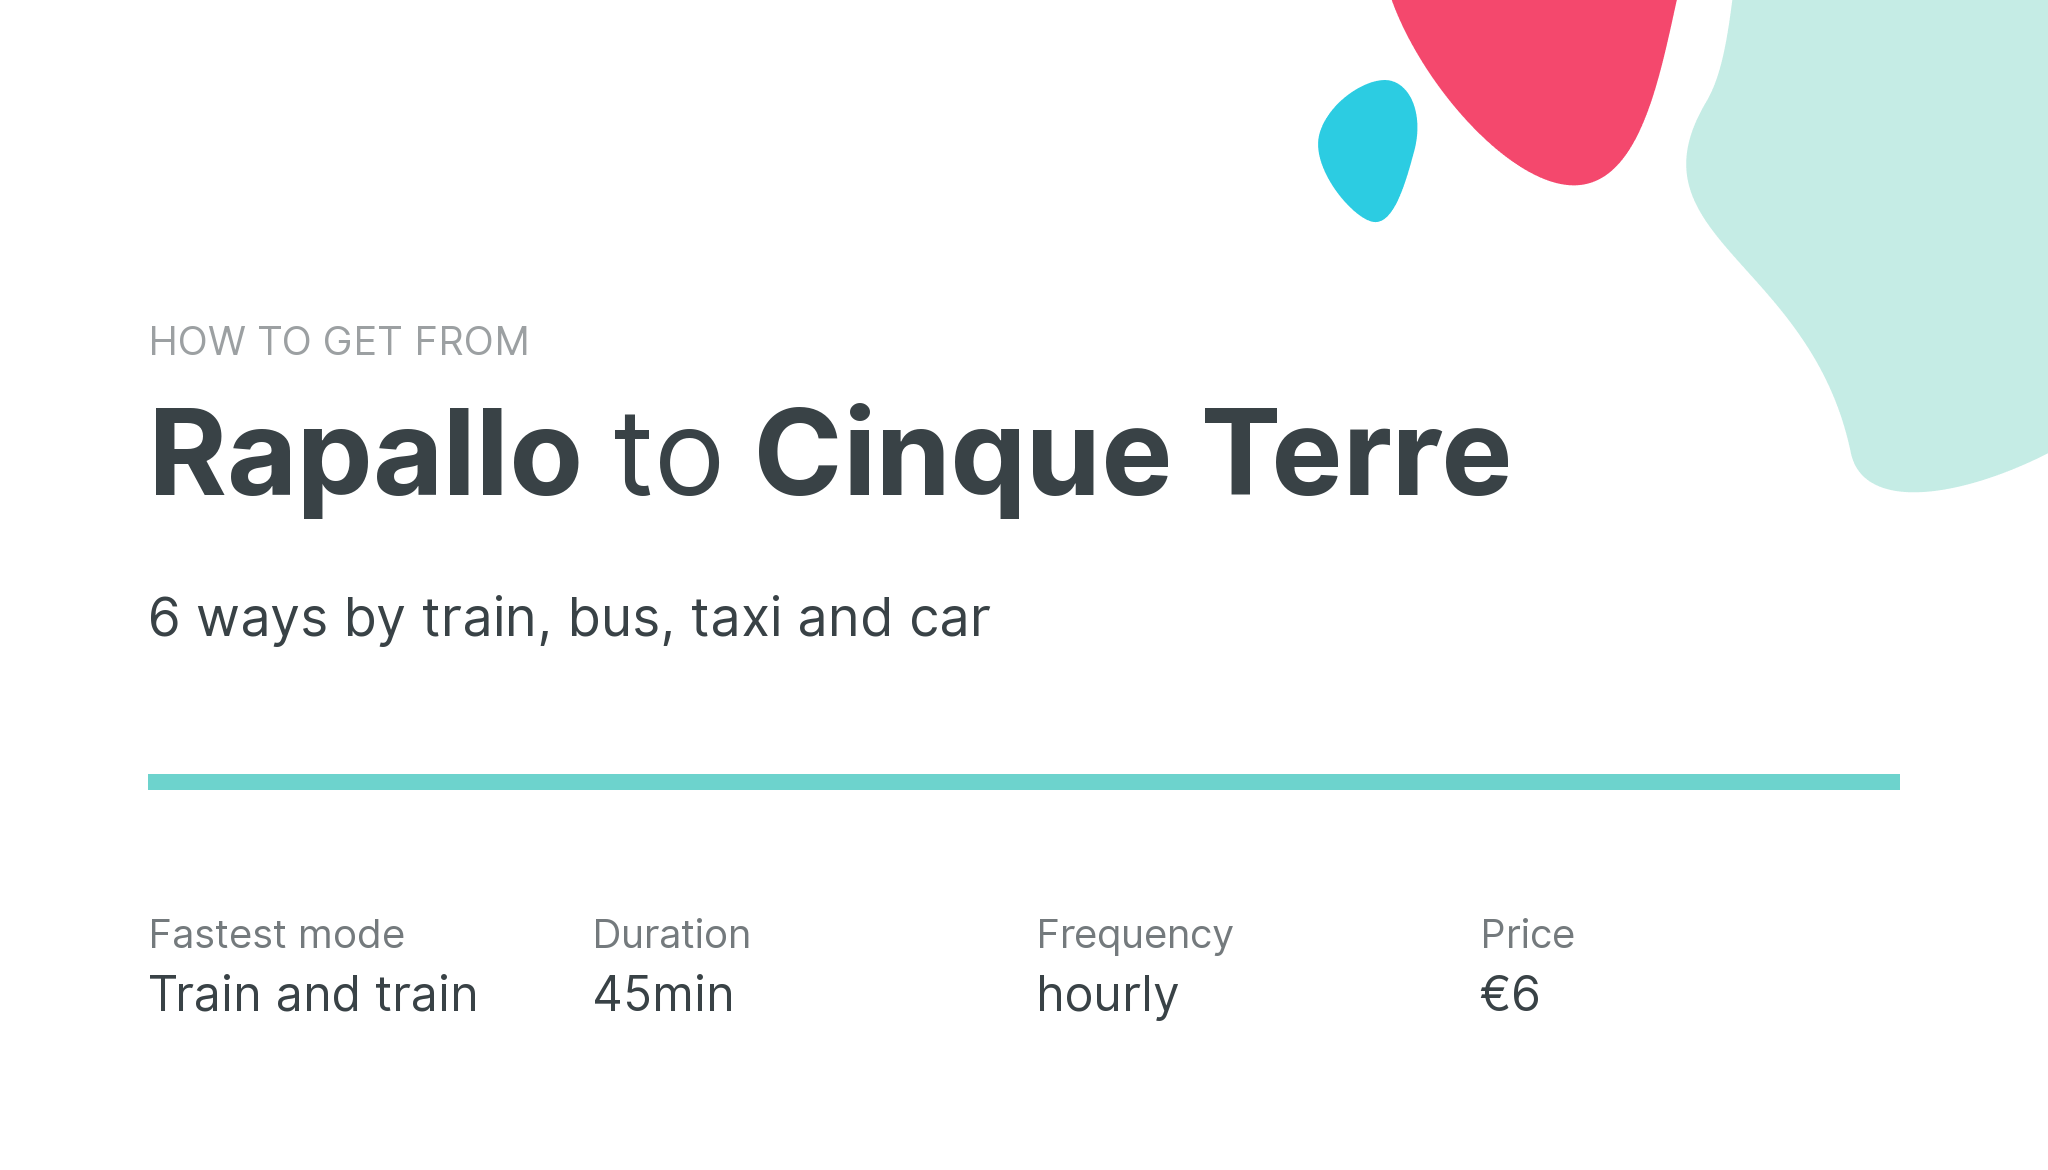 How do I get from Rapallo to Cinque Terre